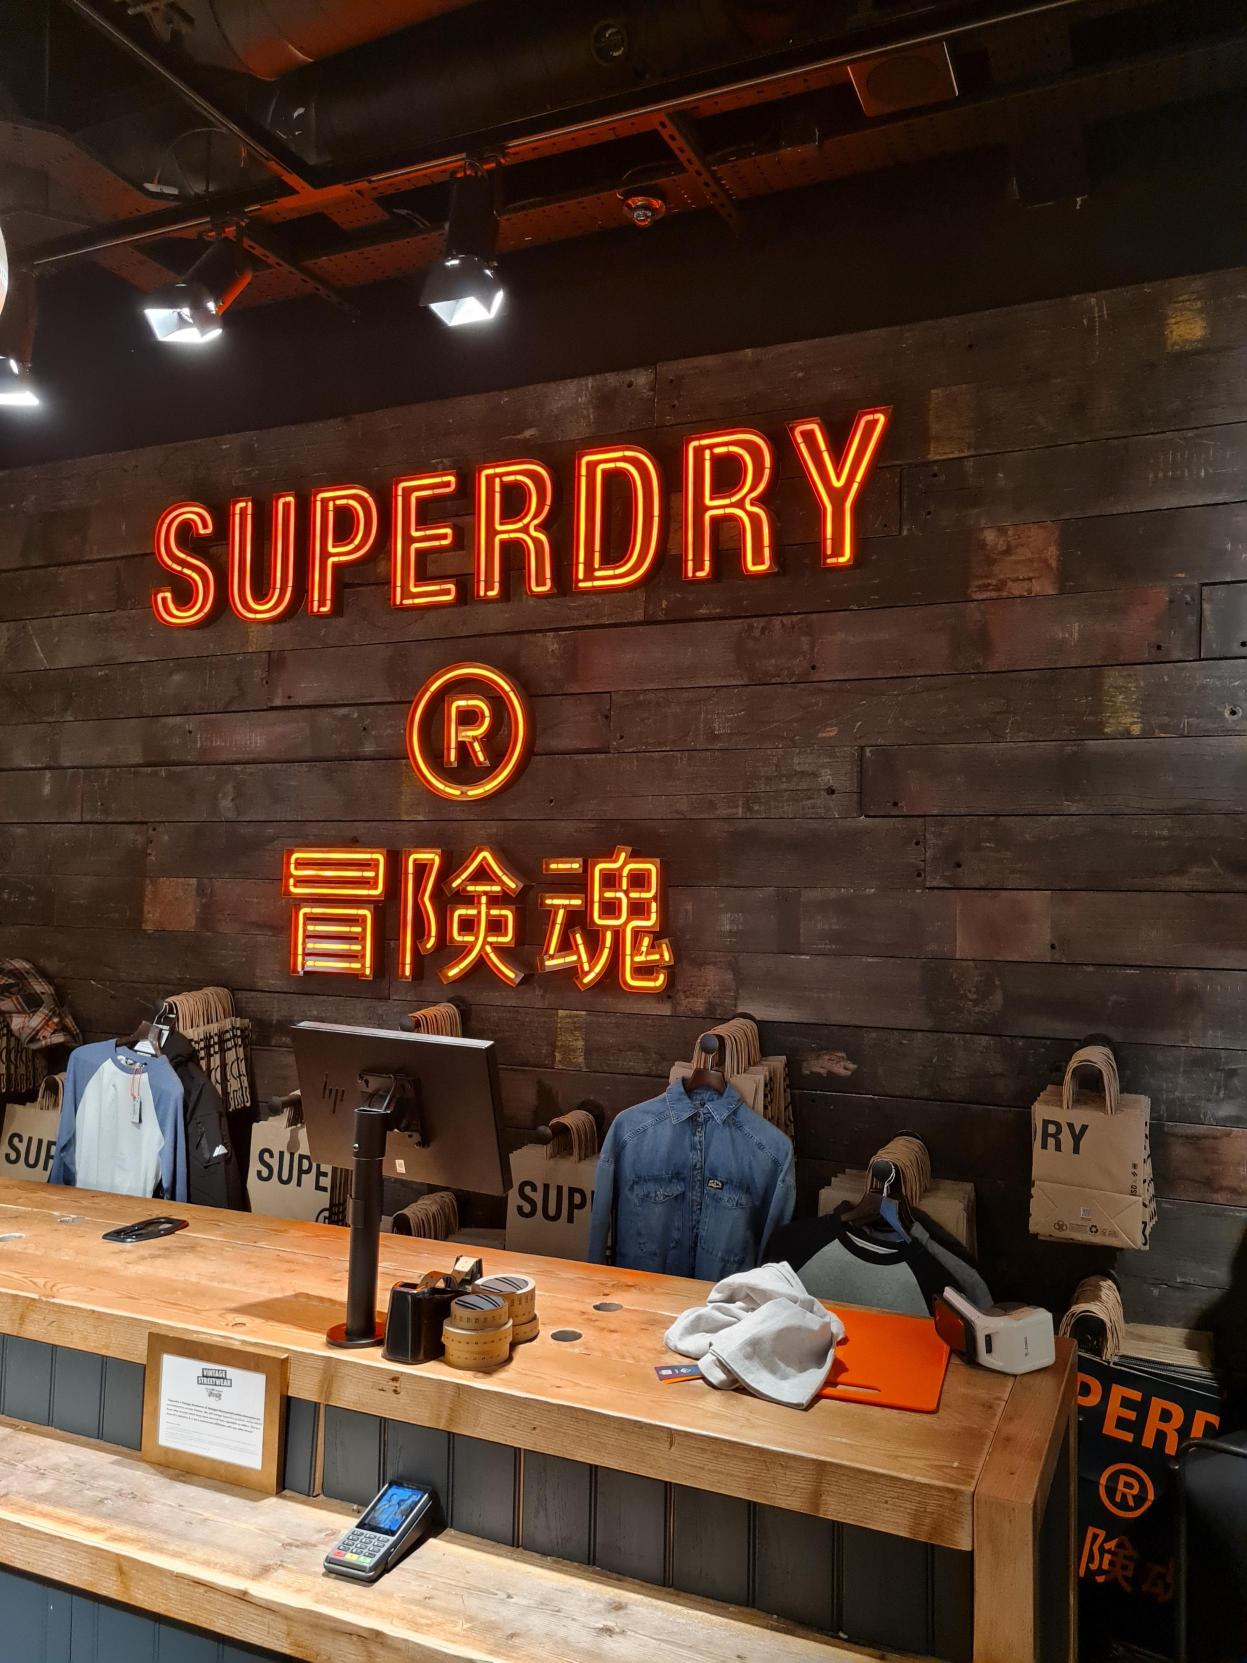 Ancient Exotic cladding at Superdry Battersea